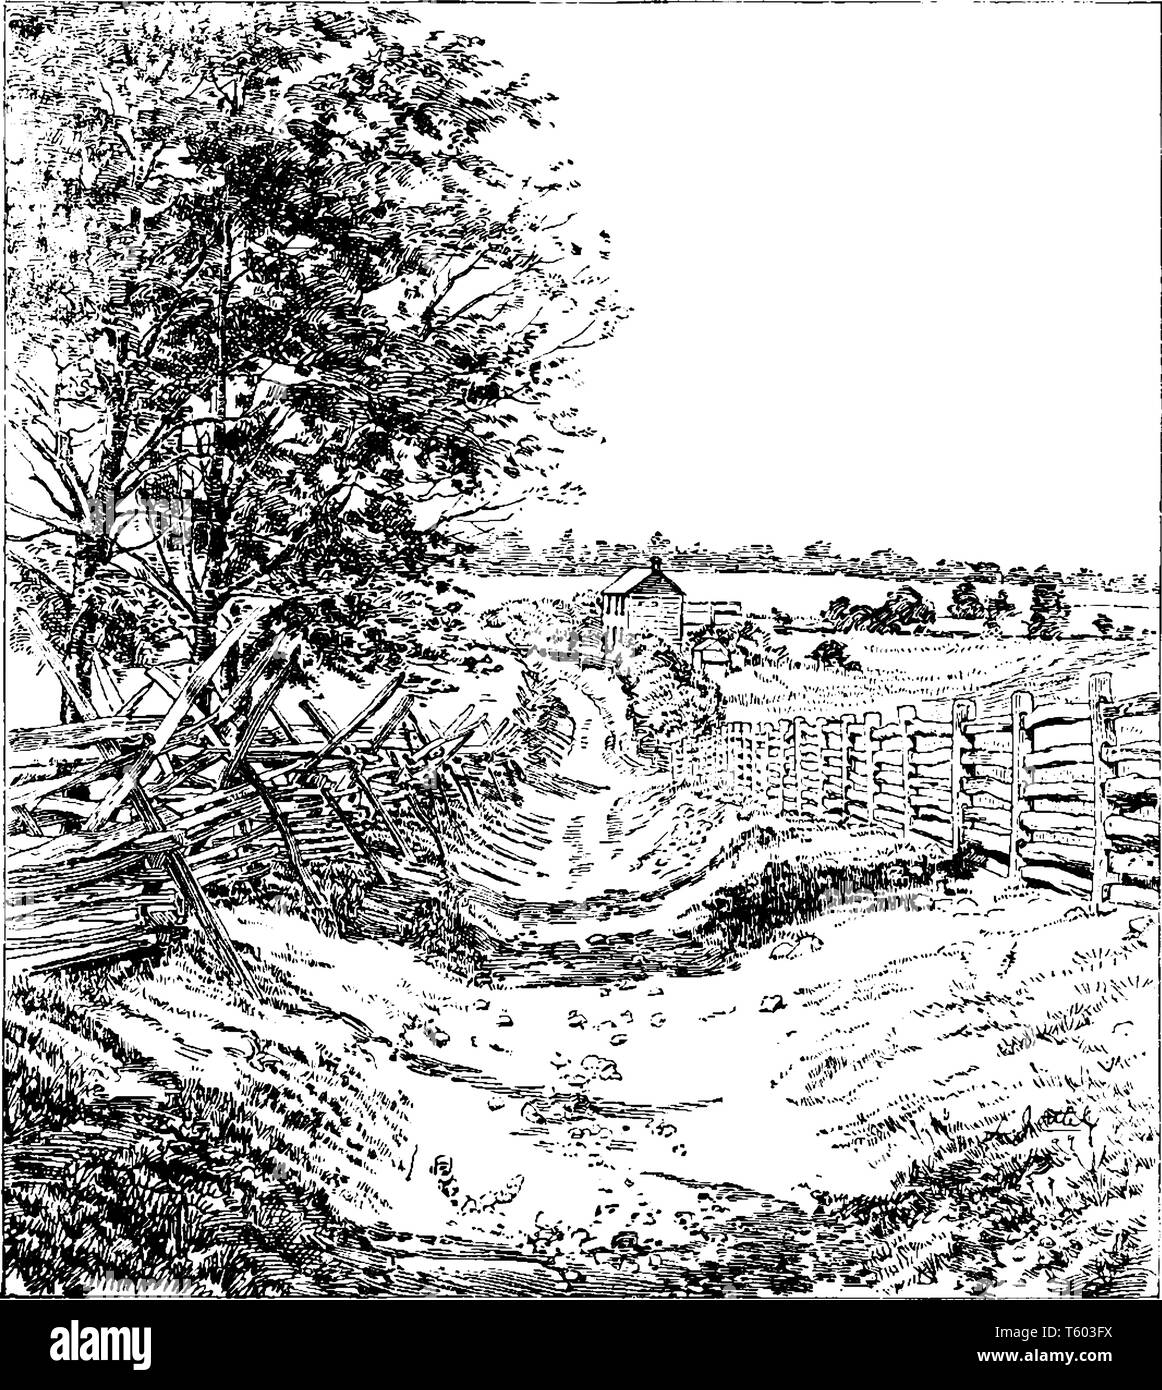 Sunken Road at Battle of Antietam also known as the Battle of Sharpsburg was fought on September 17 in 1862, vintage line drawing or engraving illustr Stock Vector